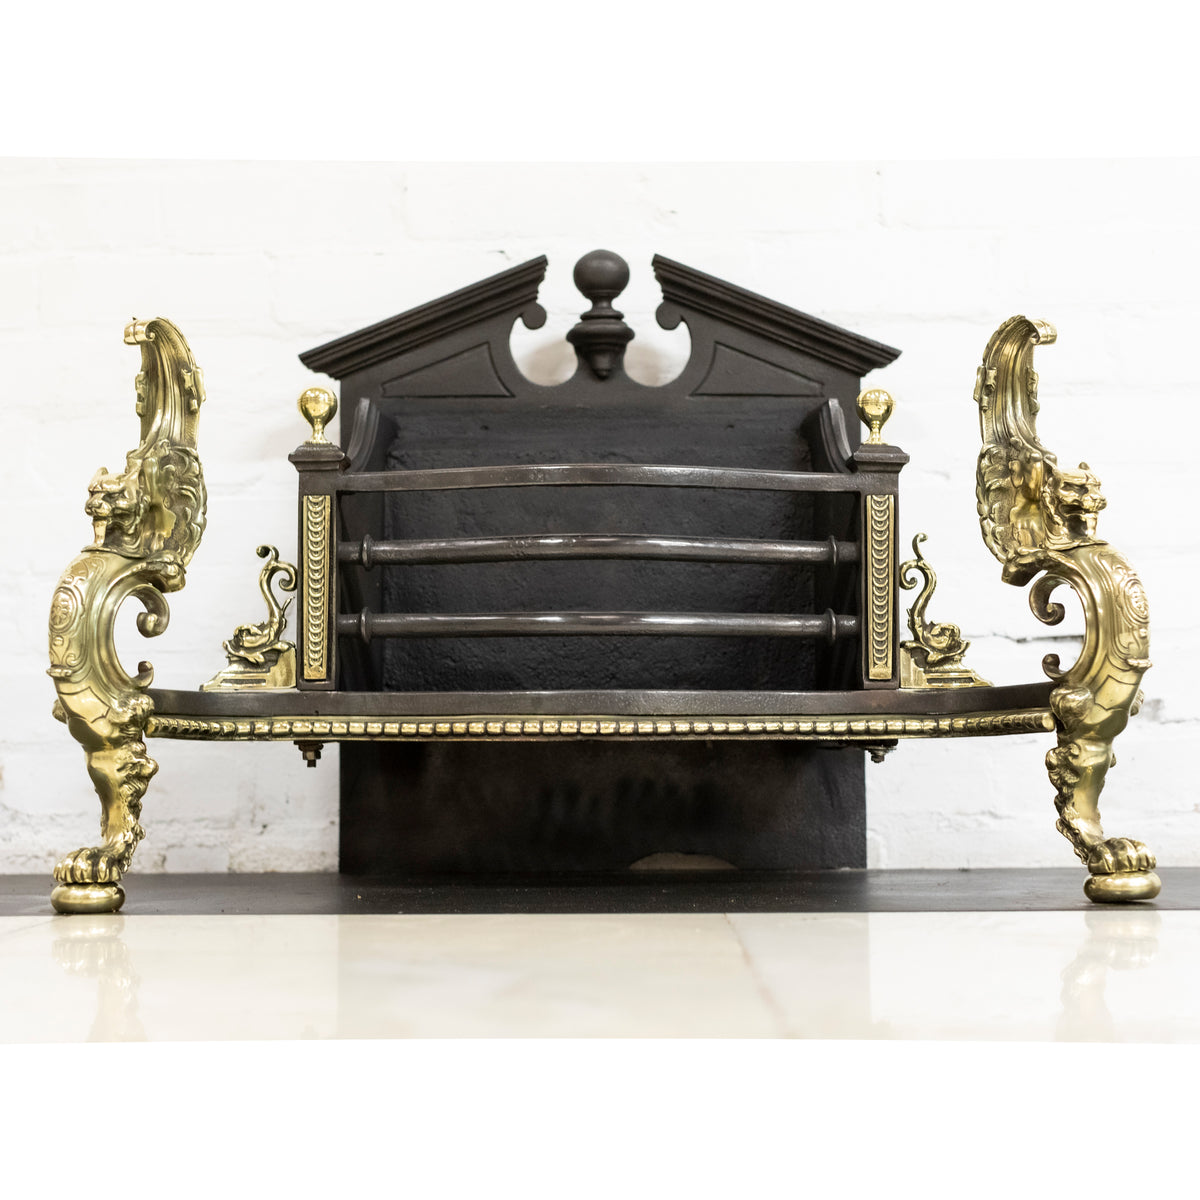 Antique Rococo Style Polished Steel and Brass Fire Basket with Griffins | The Architectural Forum